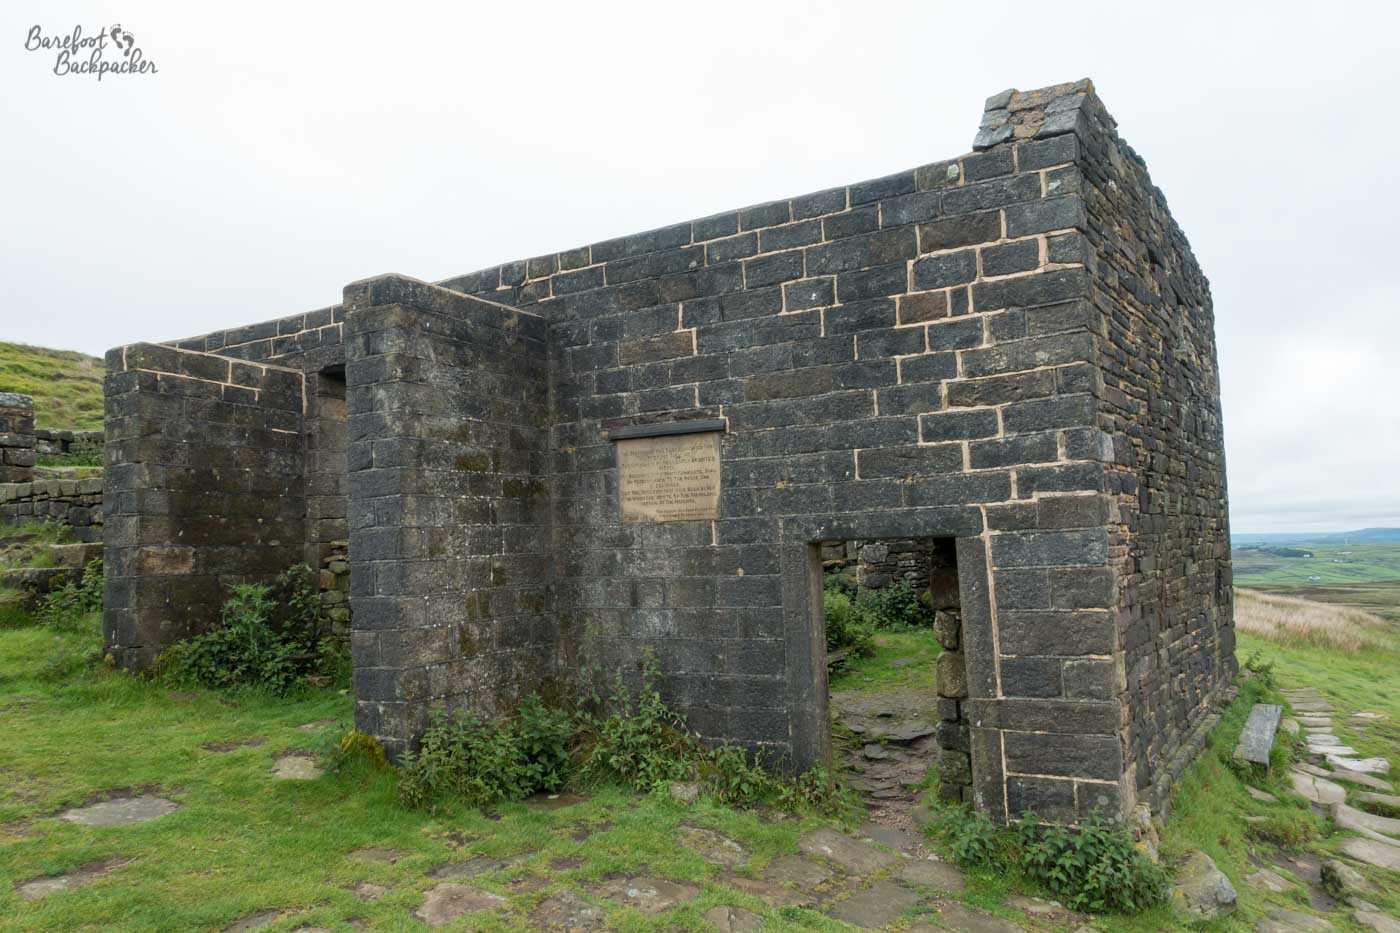 The framework of a dark stone brick building stands on moorland. The basic shape is sound, with a couple of wall juttings suggesting rooms that are lost. There is no roof.